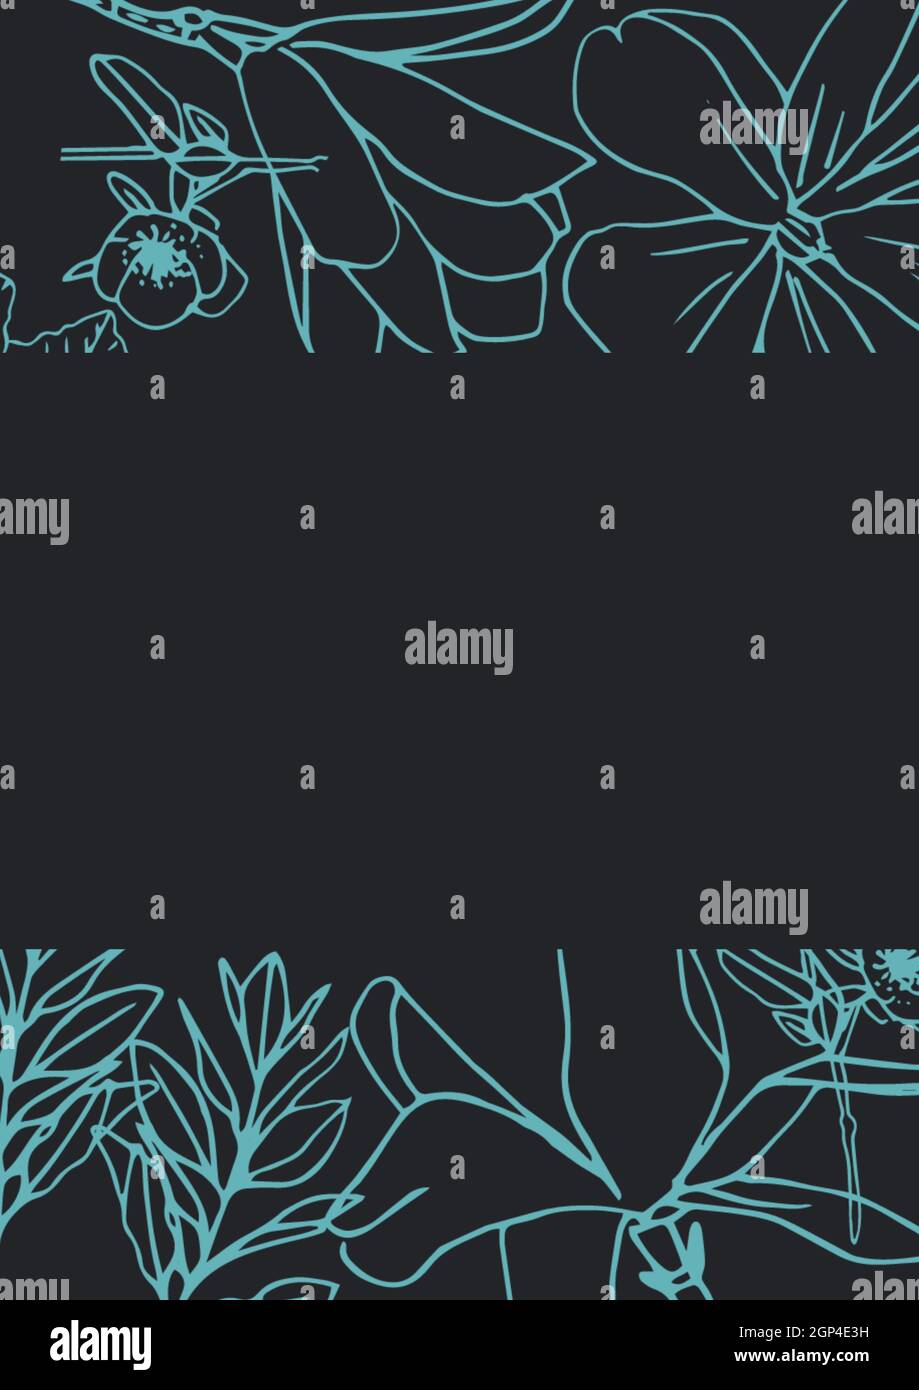 Composition of multiple flower icons on black background Stock Photo